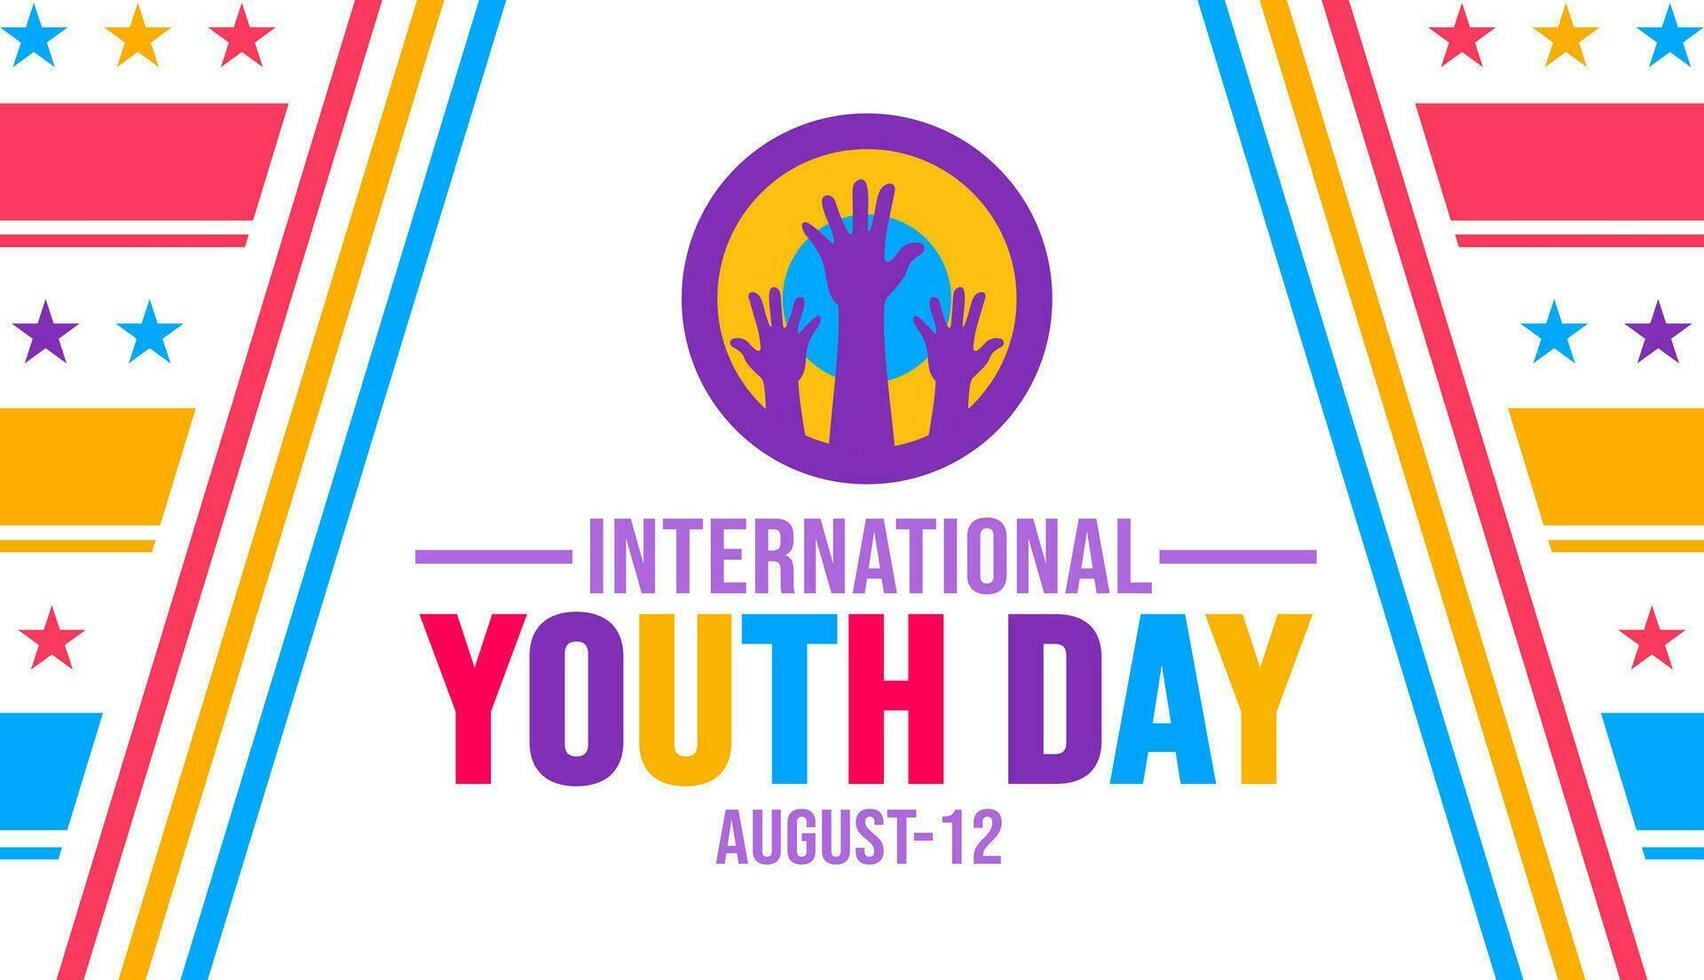 12 August International Youth Day background template. Holiday concept. background, banner, placard, card, and poster design template with text inscription and standard color. vector illustration.